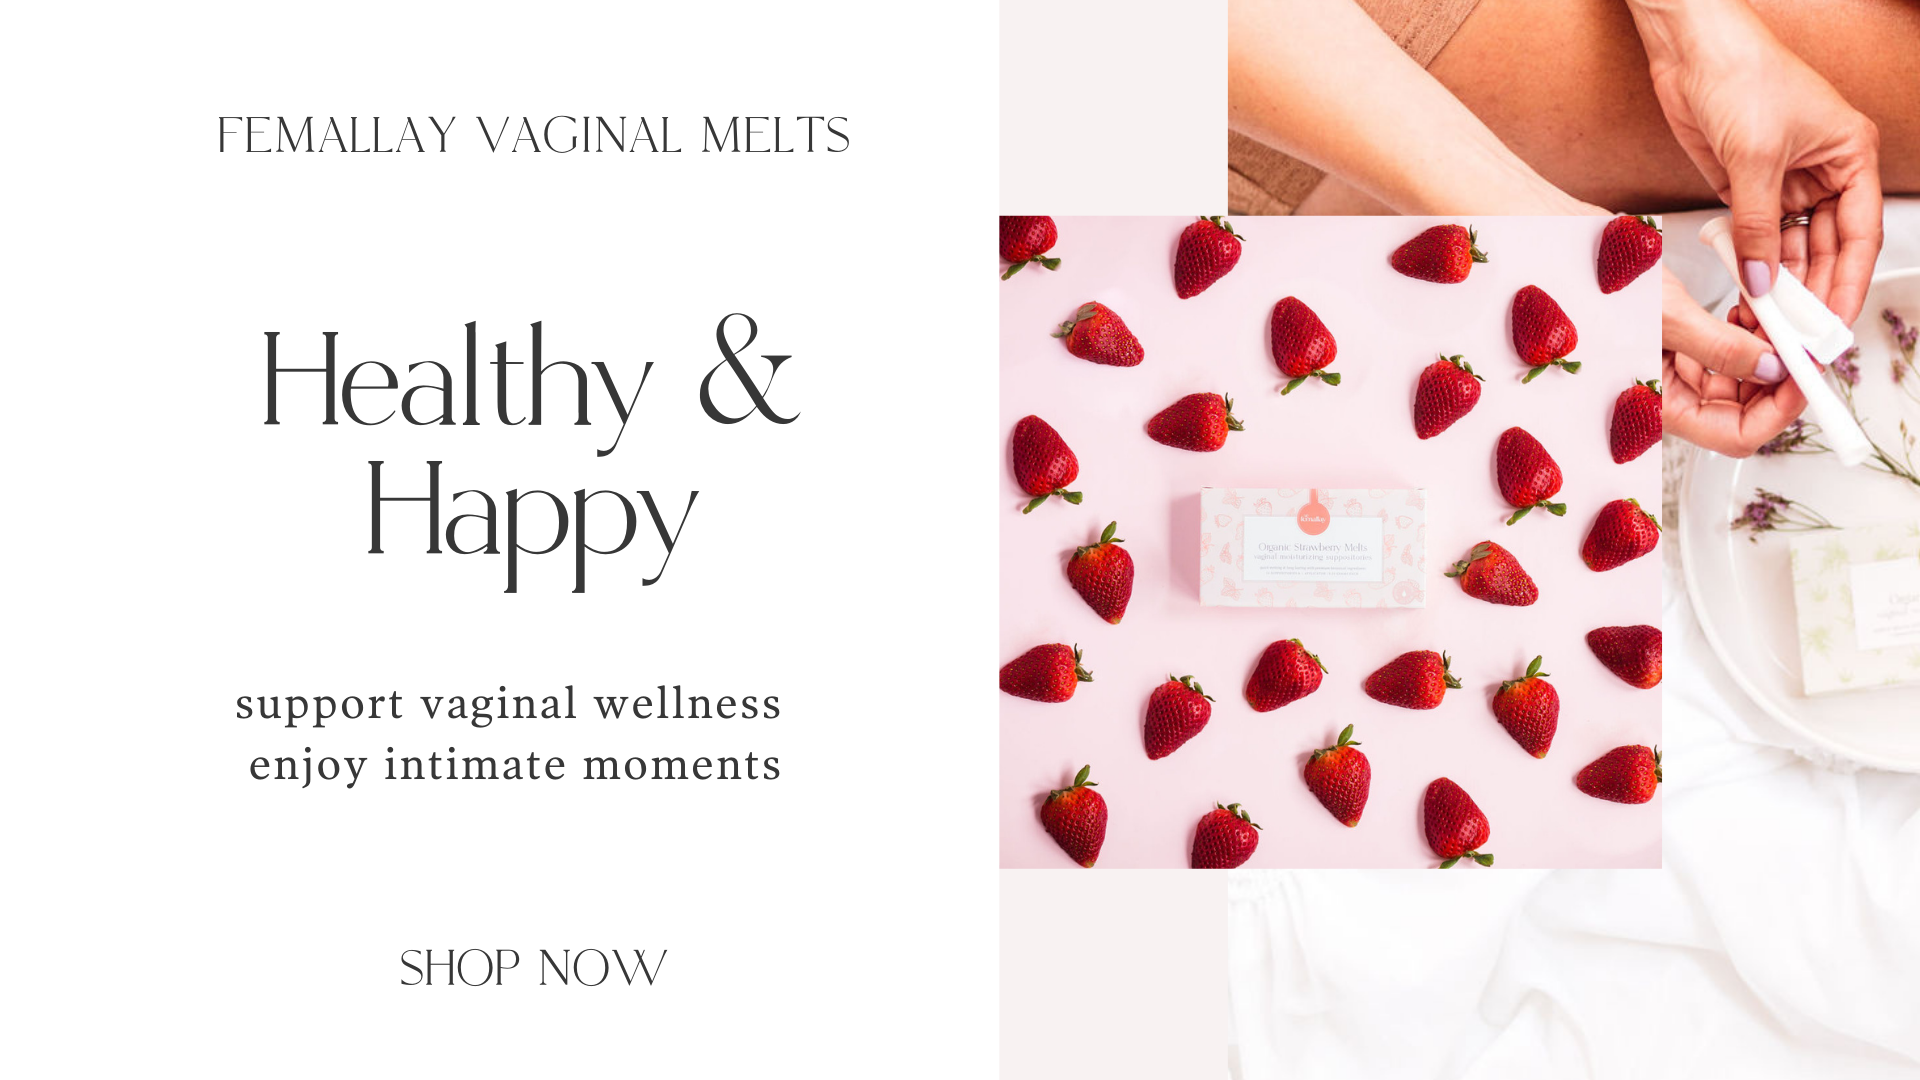 vaginal melts for sexual health and pleasure